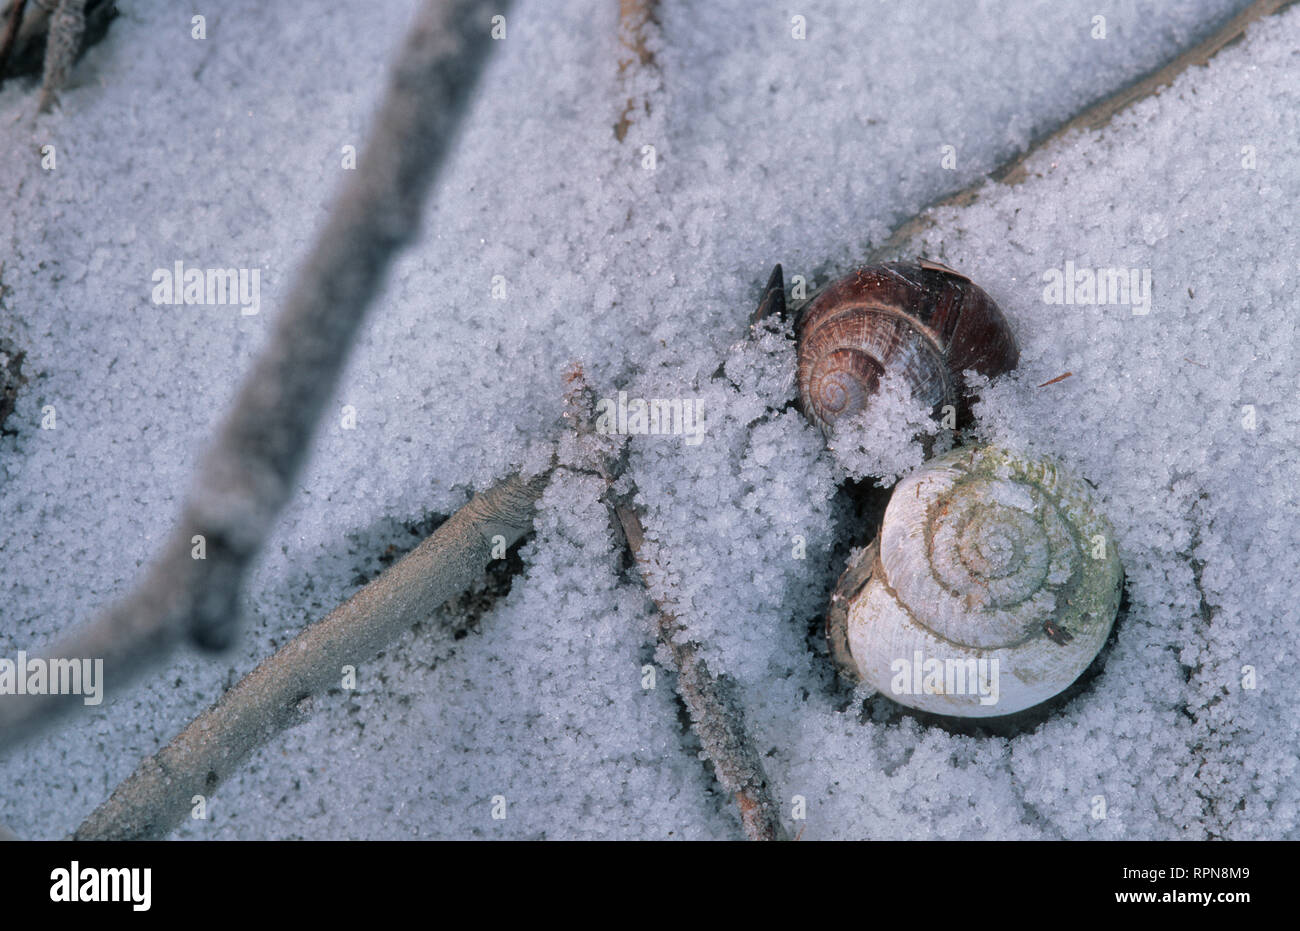 zoology / animals, mollusc (Mollusca), two snail shell in the snow, Klosterneuburg, Austria, Europe, Additional-Rights-Clearance-Info-Not-Available Stock Photo